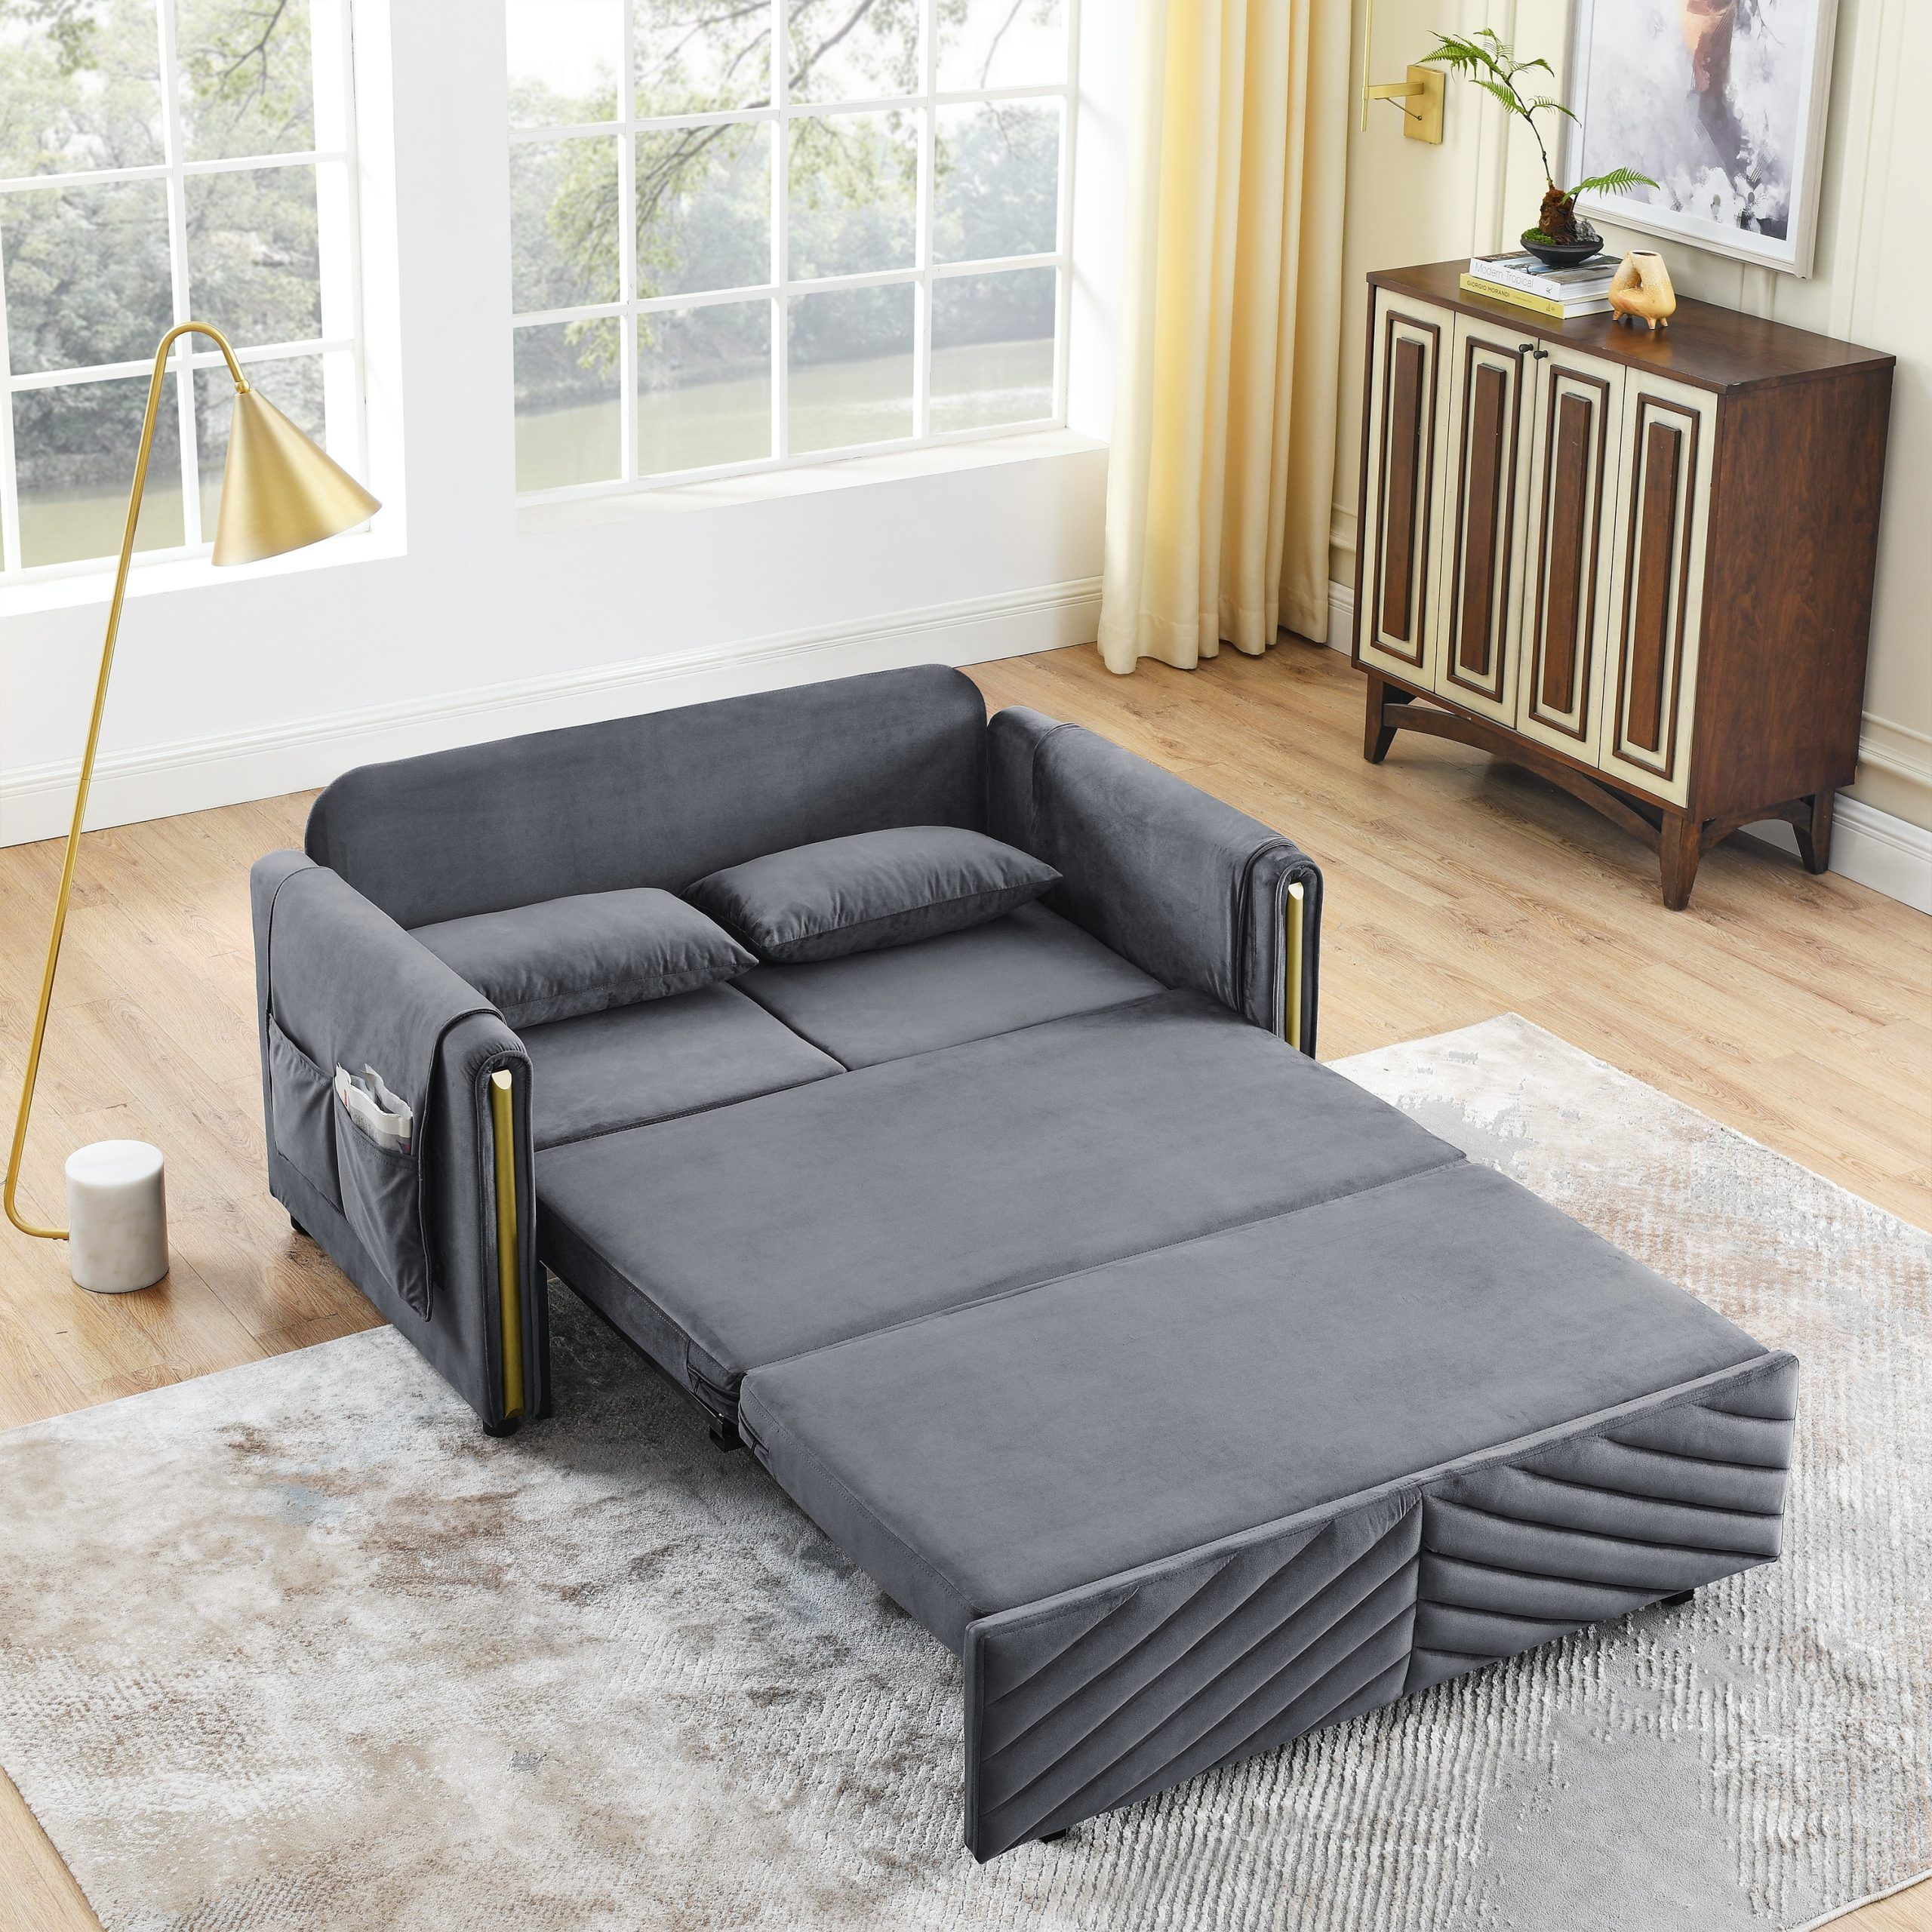 3 In 1 Convertible Sleeper Sofa Bed, 55" Multi Functional Pull Out Couch,  Velvet Loveseat Futon Bed W/2 Pillows & Storage Bags – Bed Bath & Beyond –  38908479 With 2 In 1 Gray Pull Out Sofa Beds (View 10 of 15)